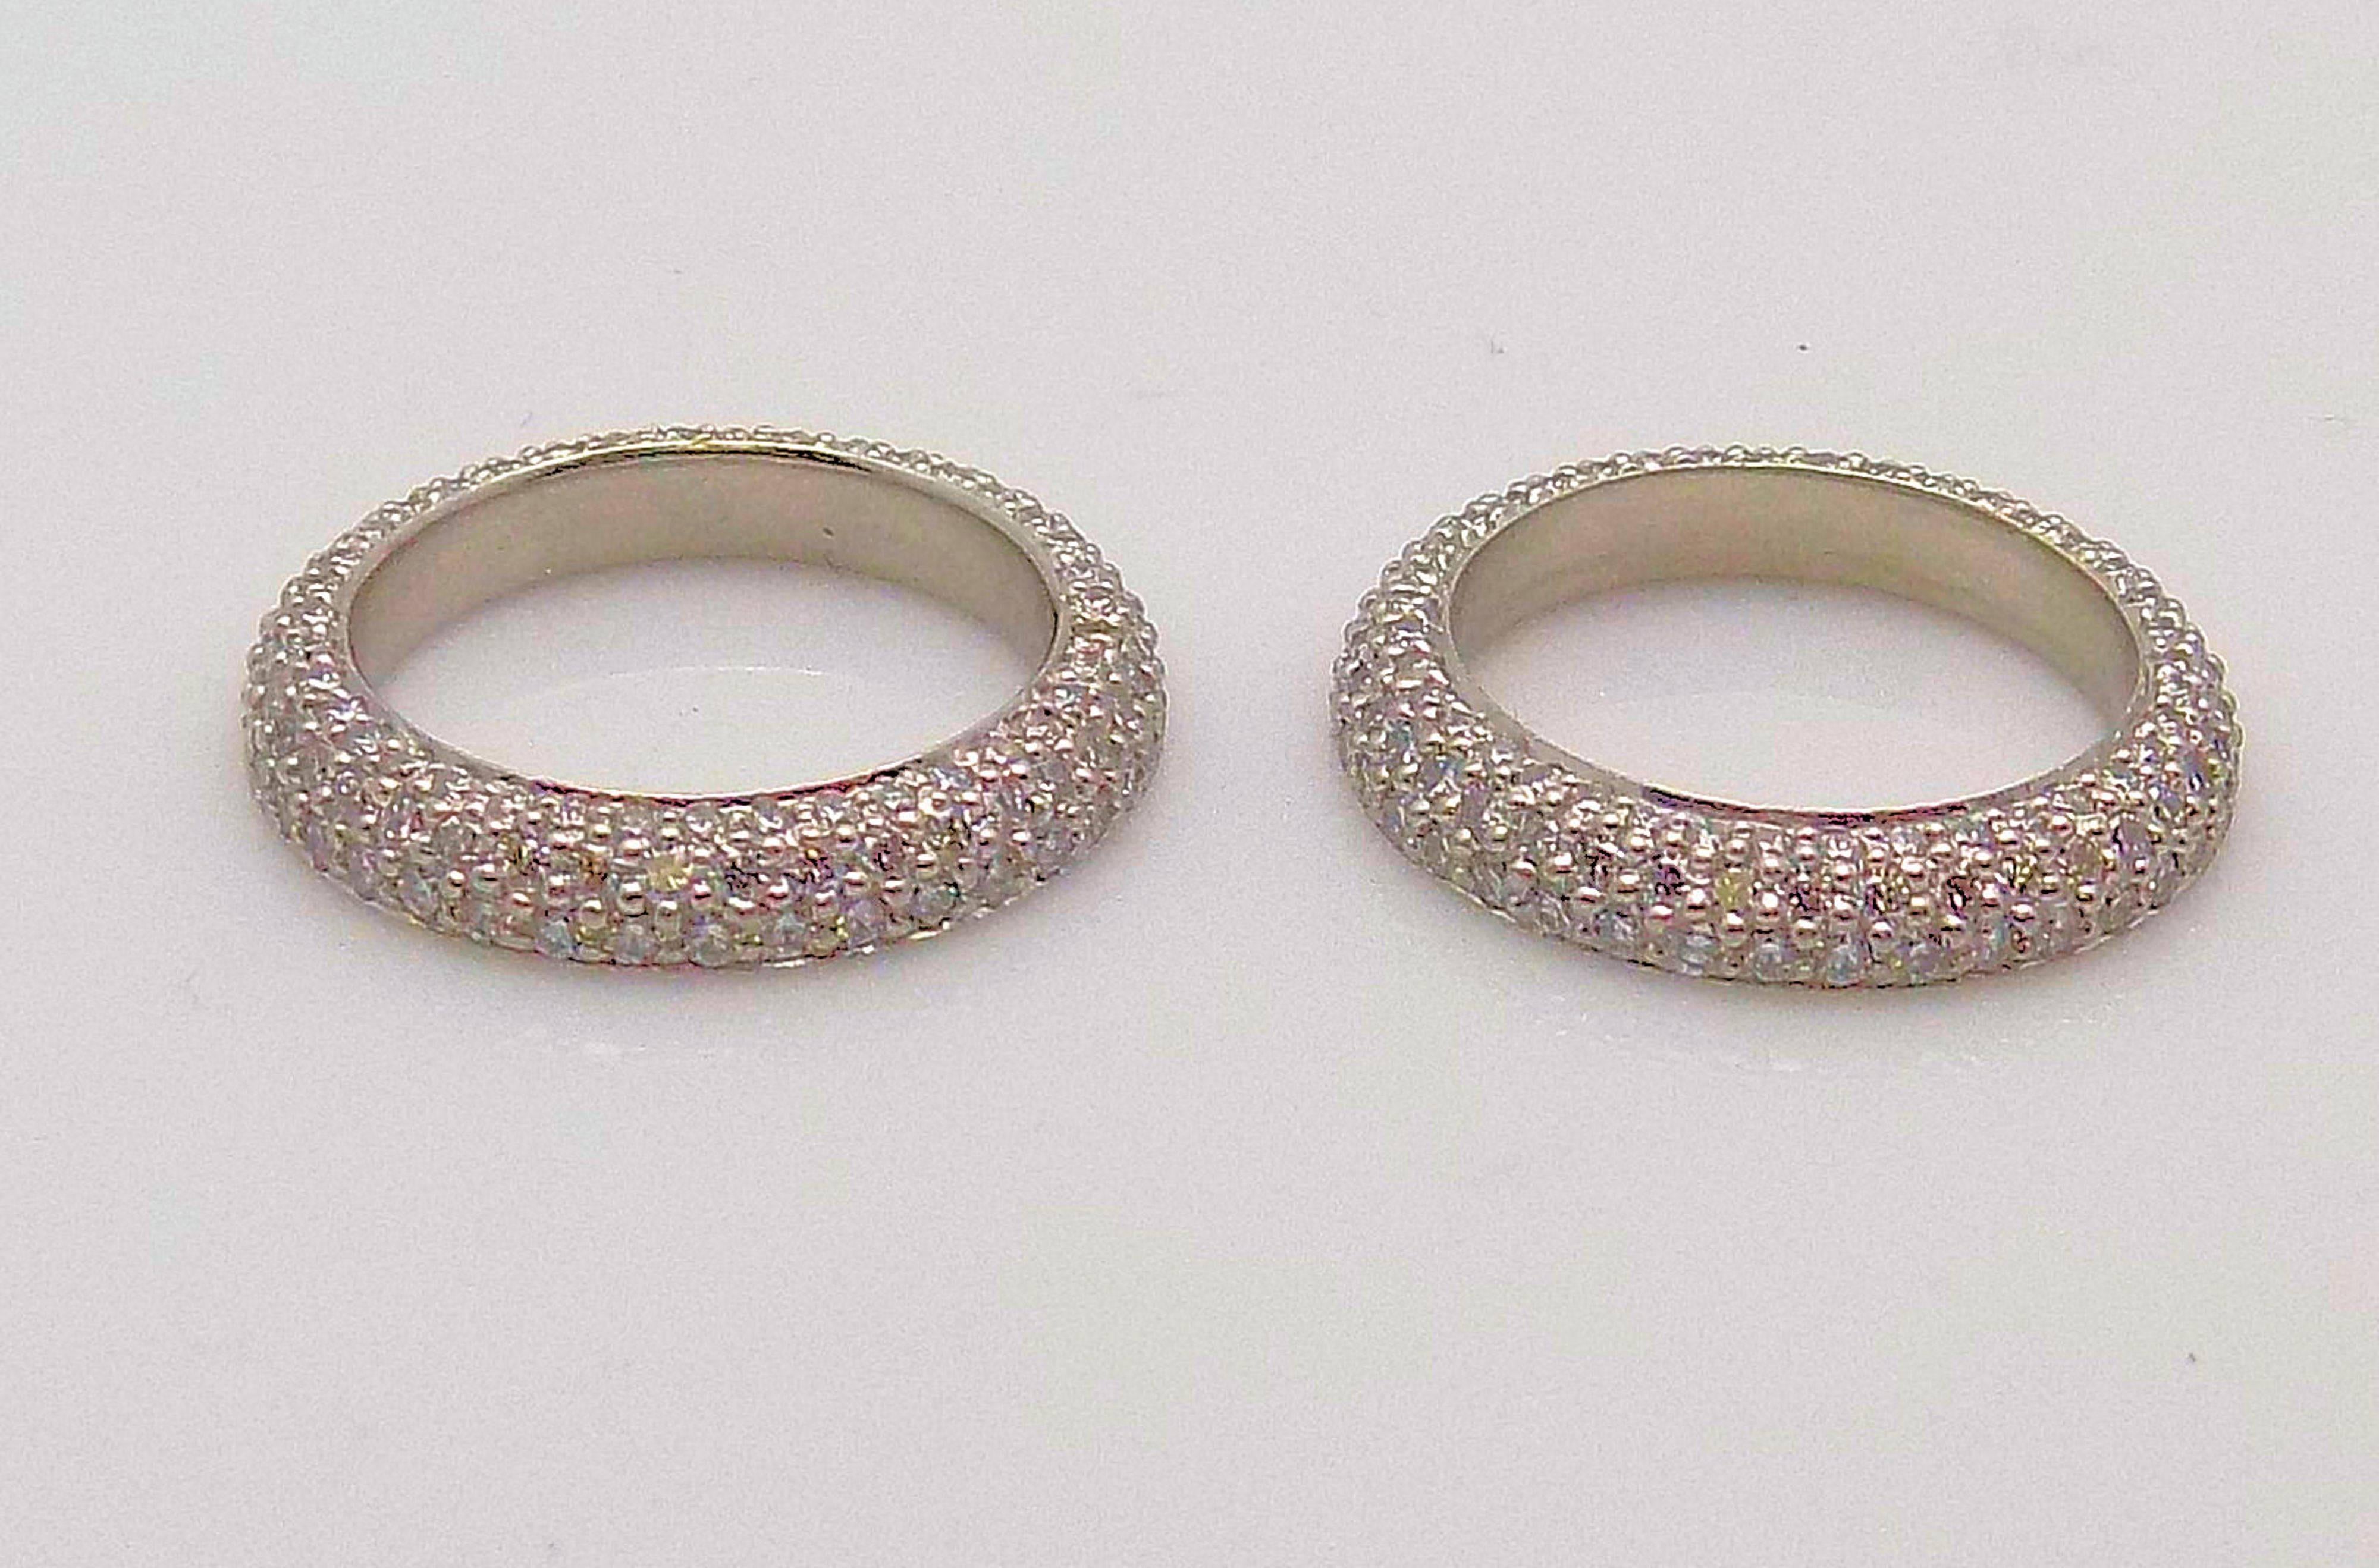 Round Cut Pair of Platinum Pave' Diamond Eternity Bands by Matthew Trent For Sale